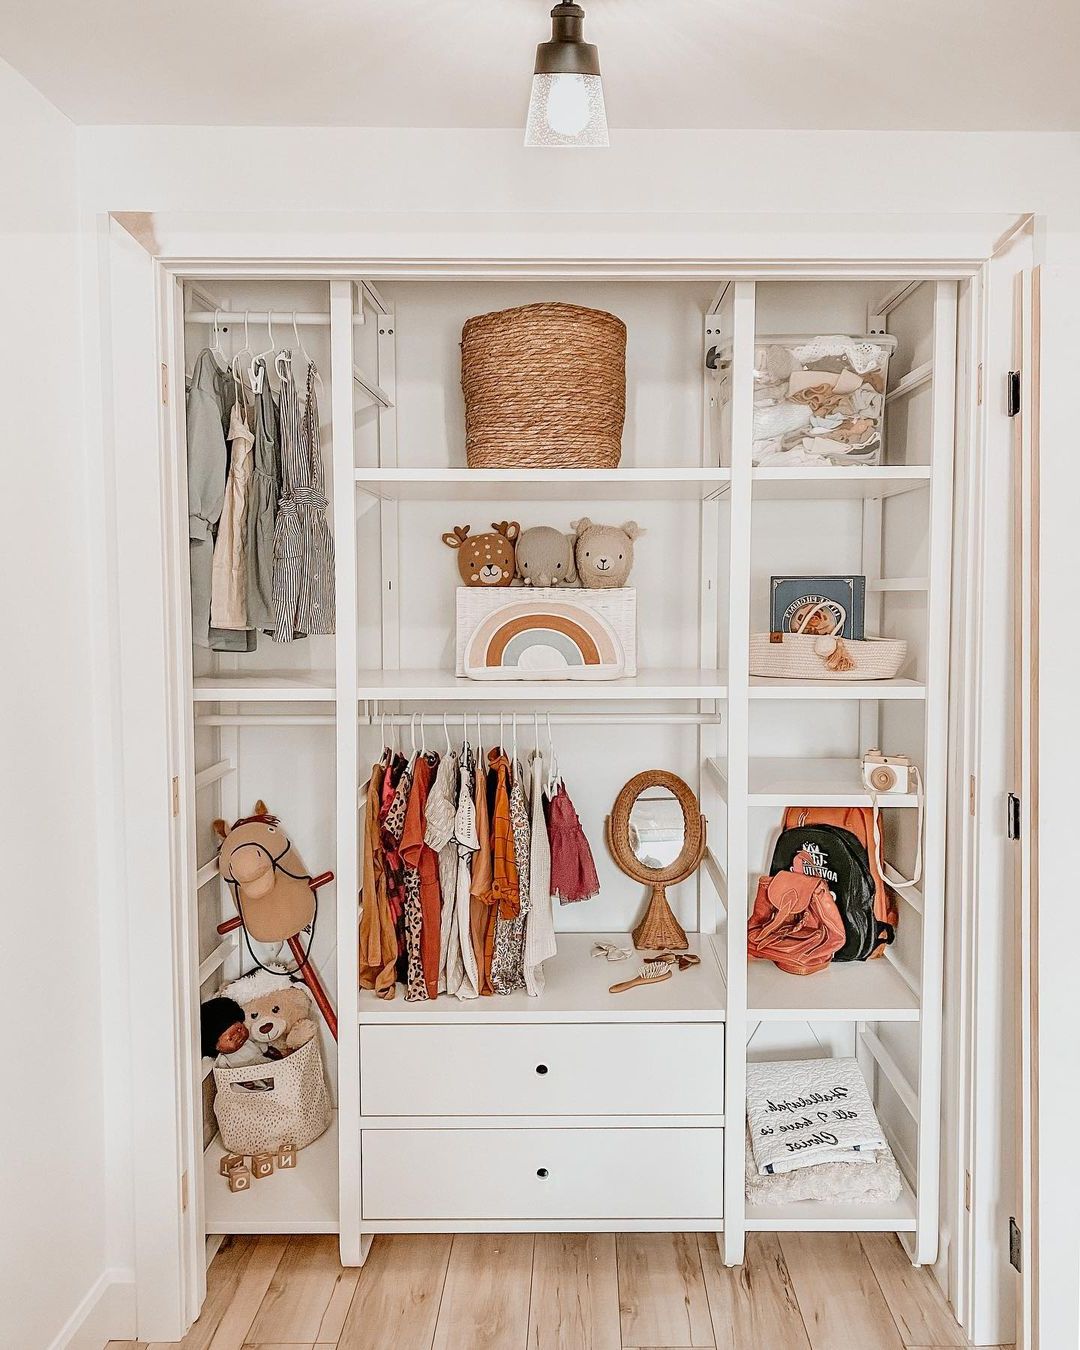 10 Ikea Closet Ideas For Kids That Are Just Plain Fun | Hunker For Childrens Wardrobes With Drawers And Shelves (View 8 of 20)